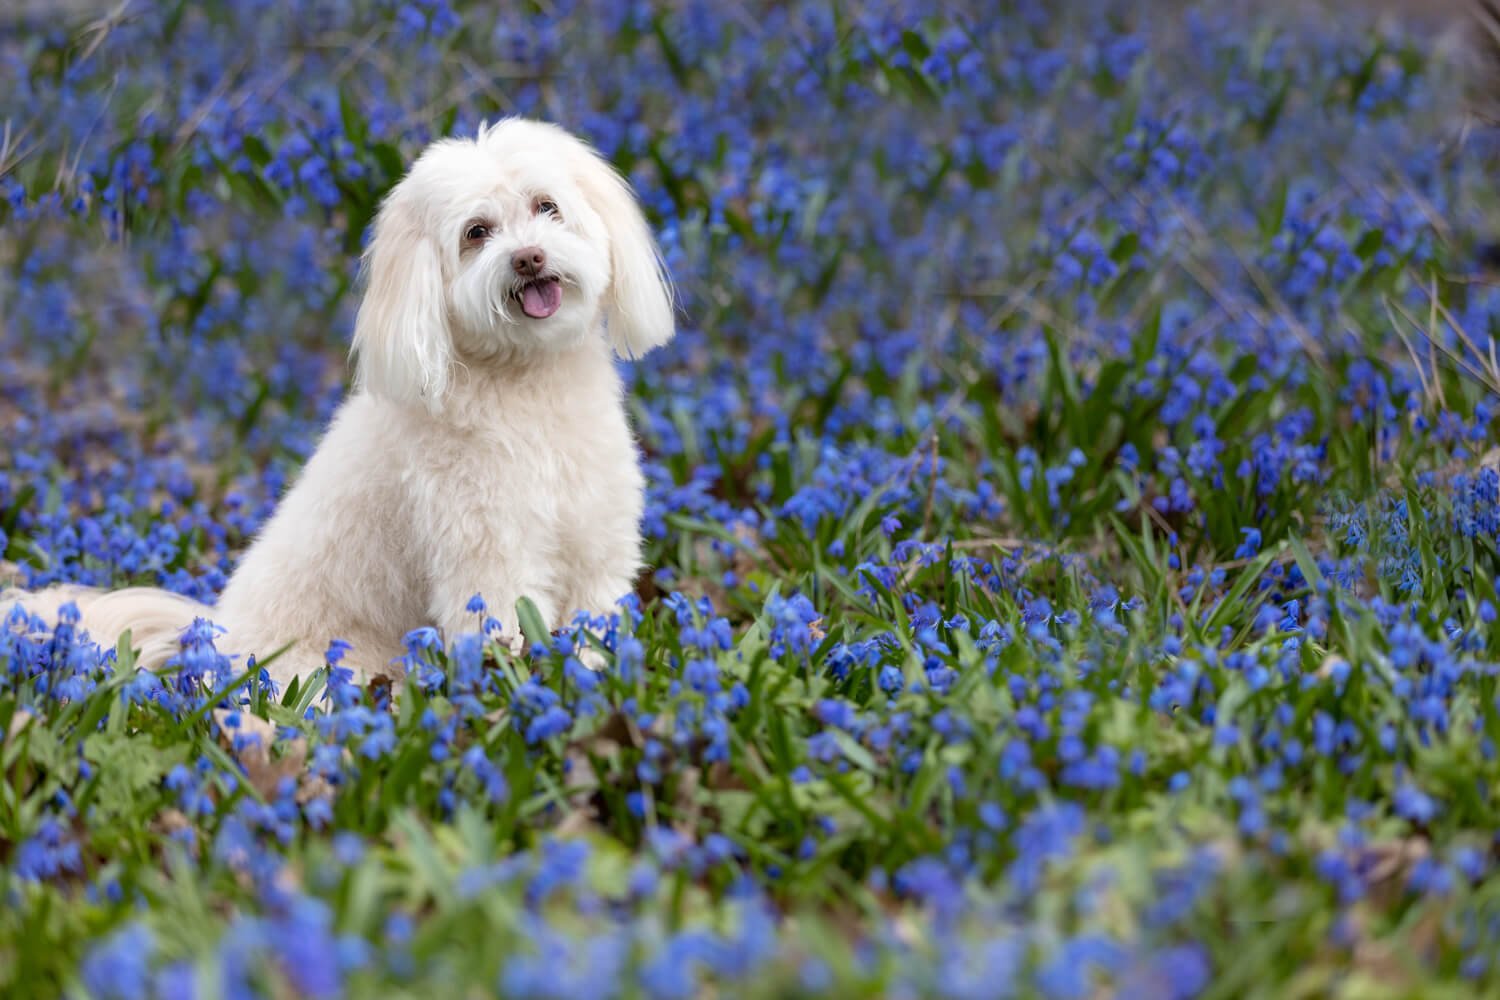 Ginger in the bluebells that bloom in the spring